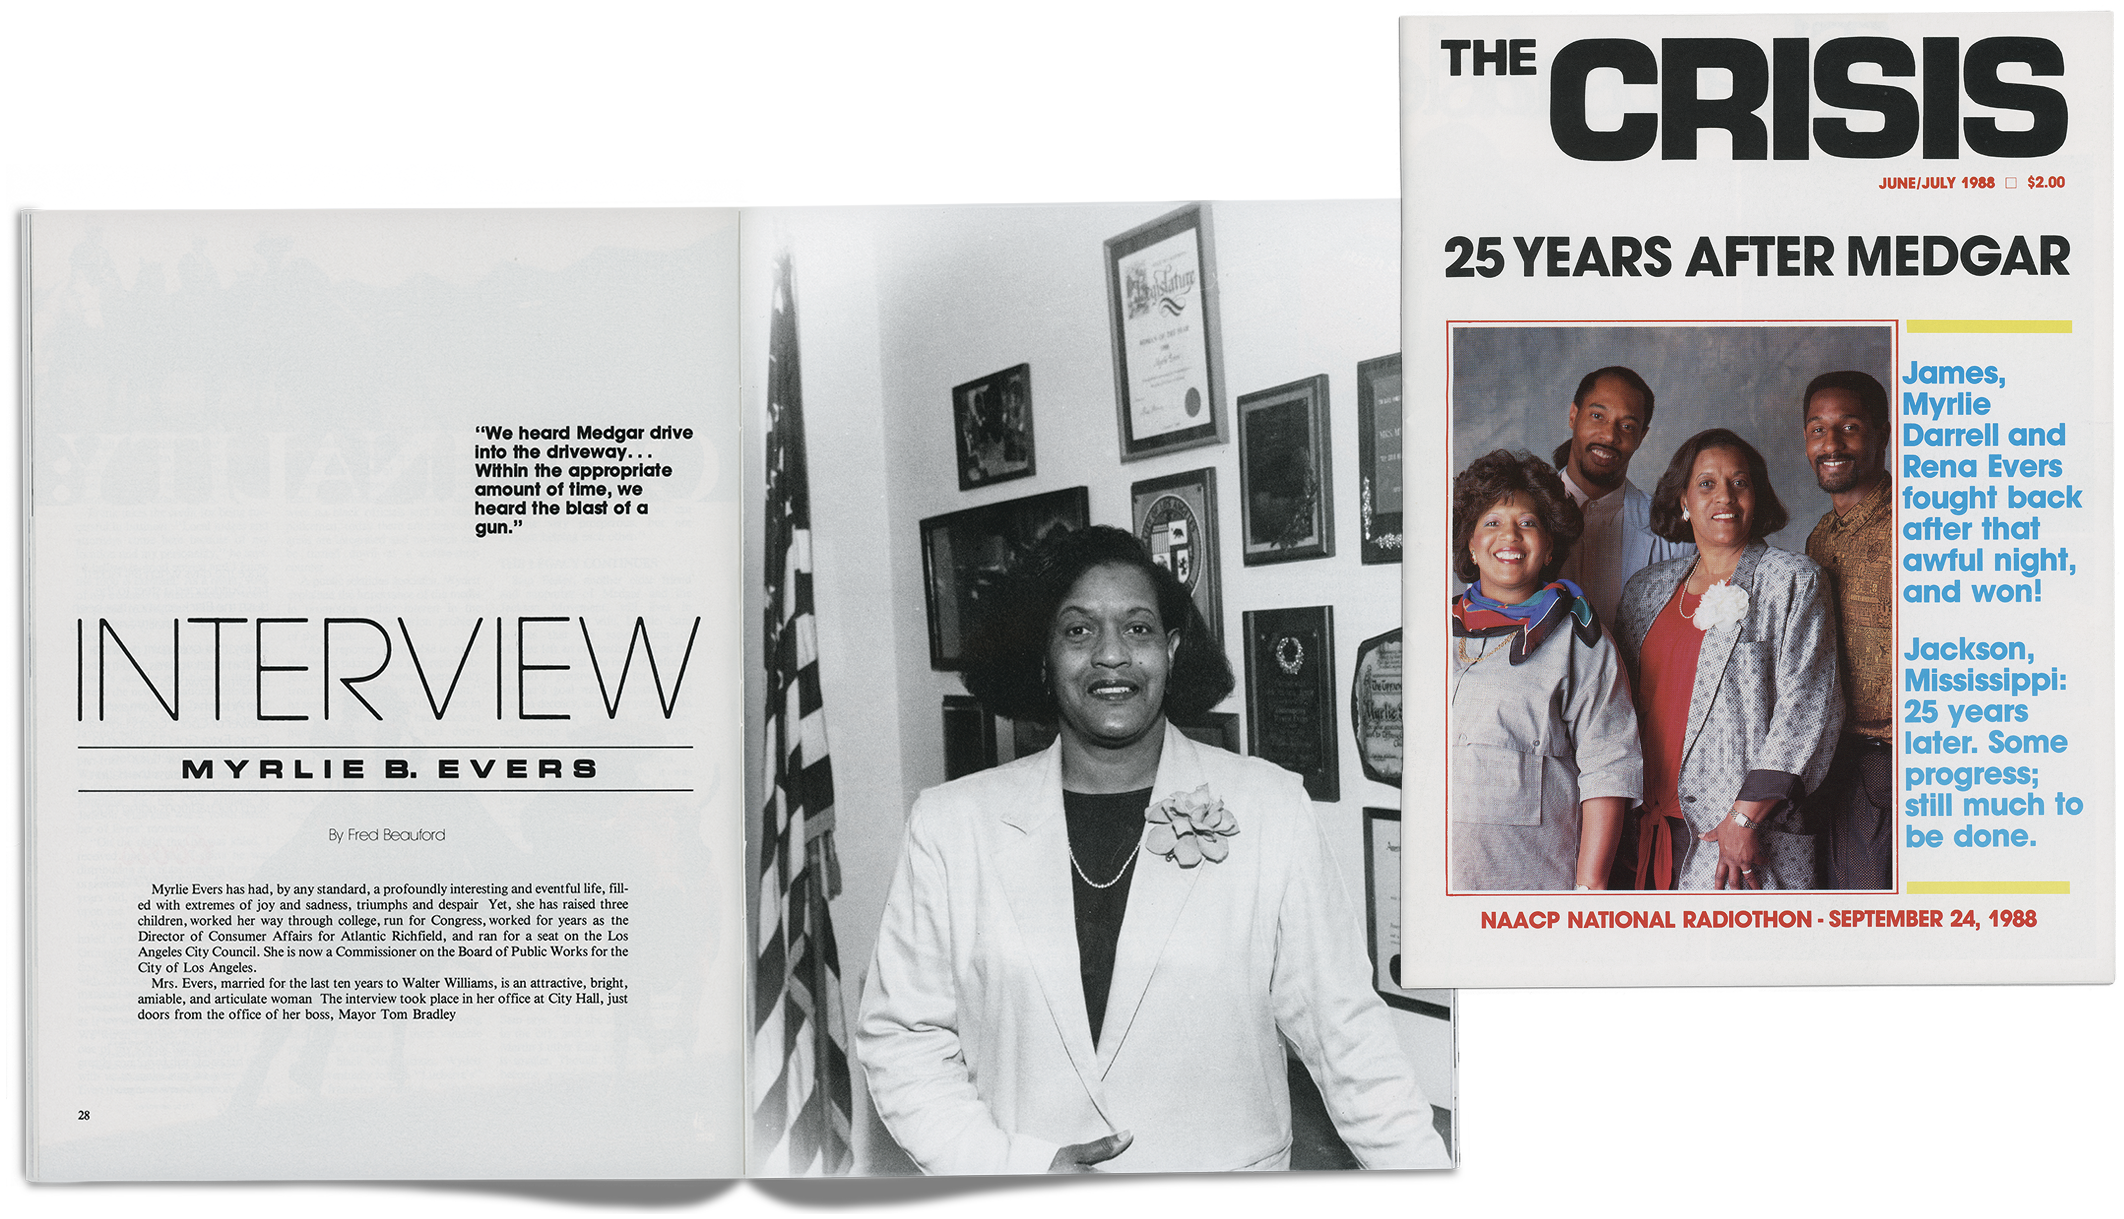 Crisis magazine, June/July 1988: Reena, Darrell, Evers-Williams and James on the 25th anniversary of Medgar Evers' death.